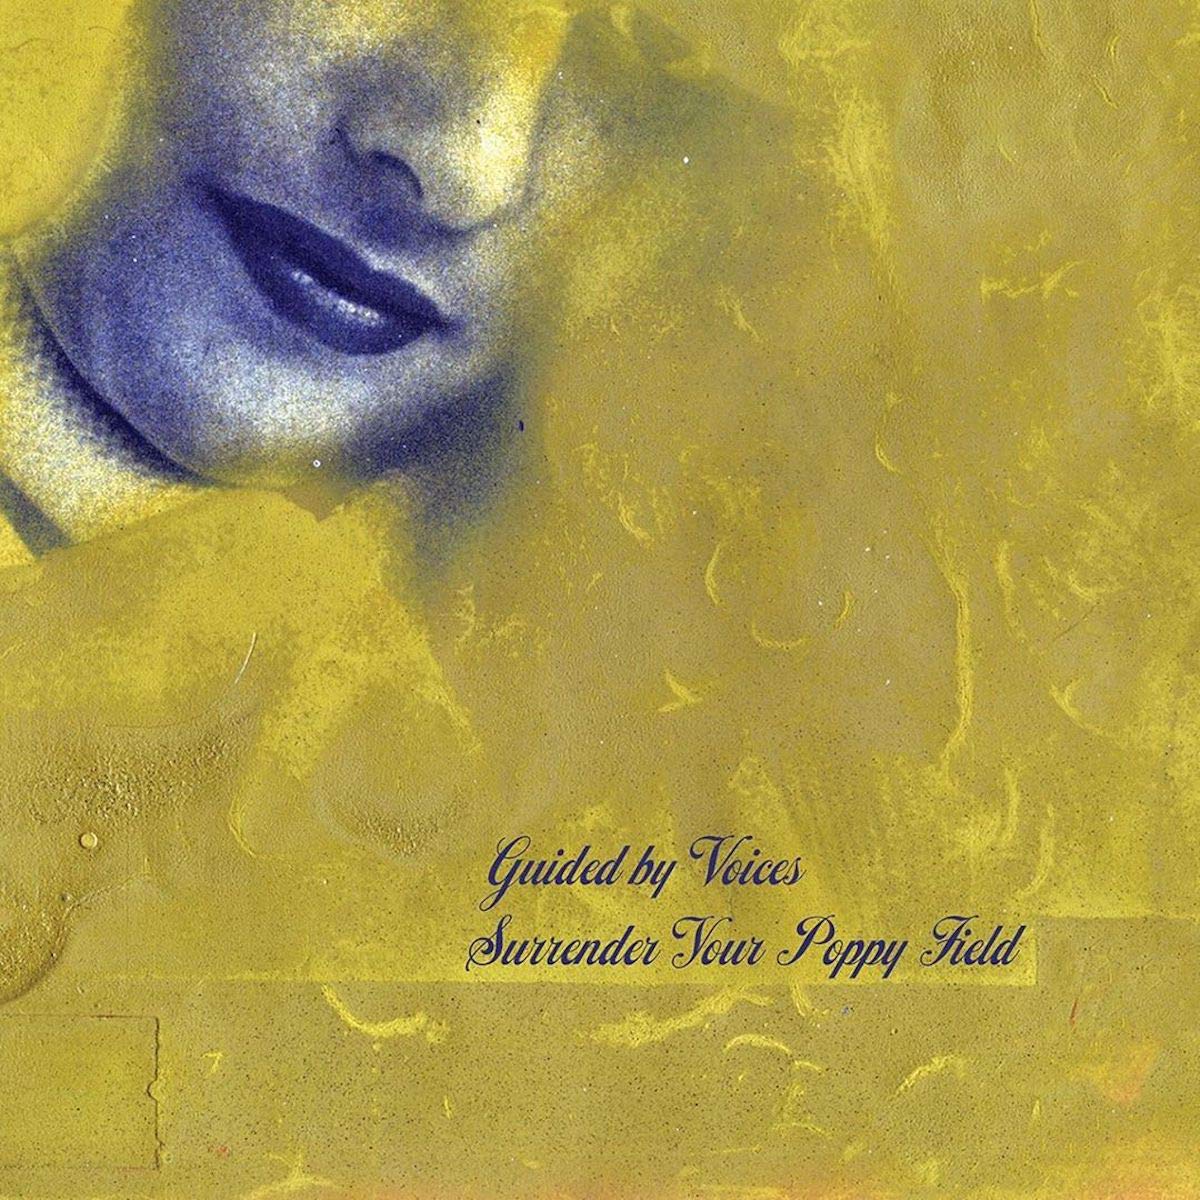 Guided By Voices – Surrender Your Poppy Field (2020) [FLAC]